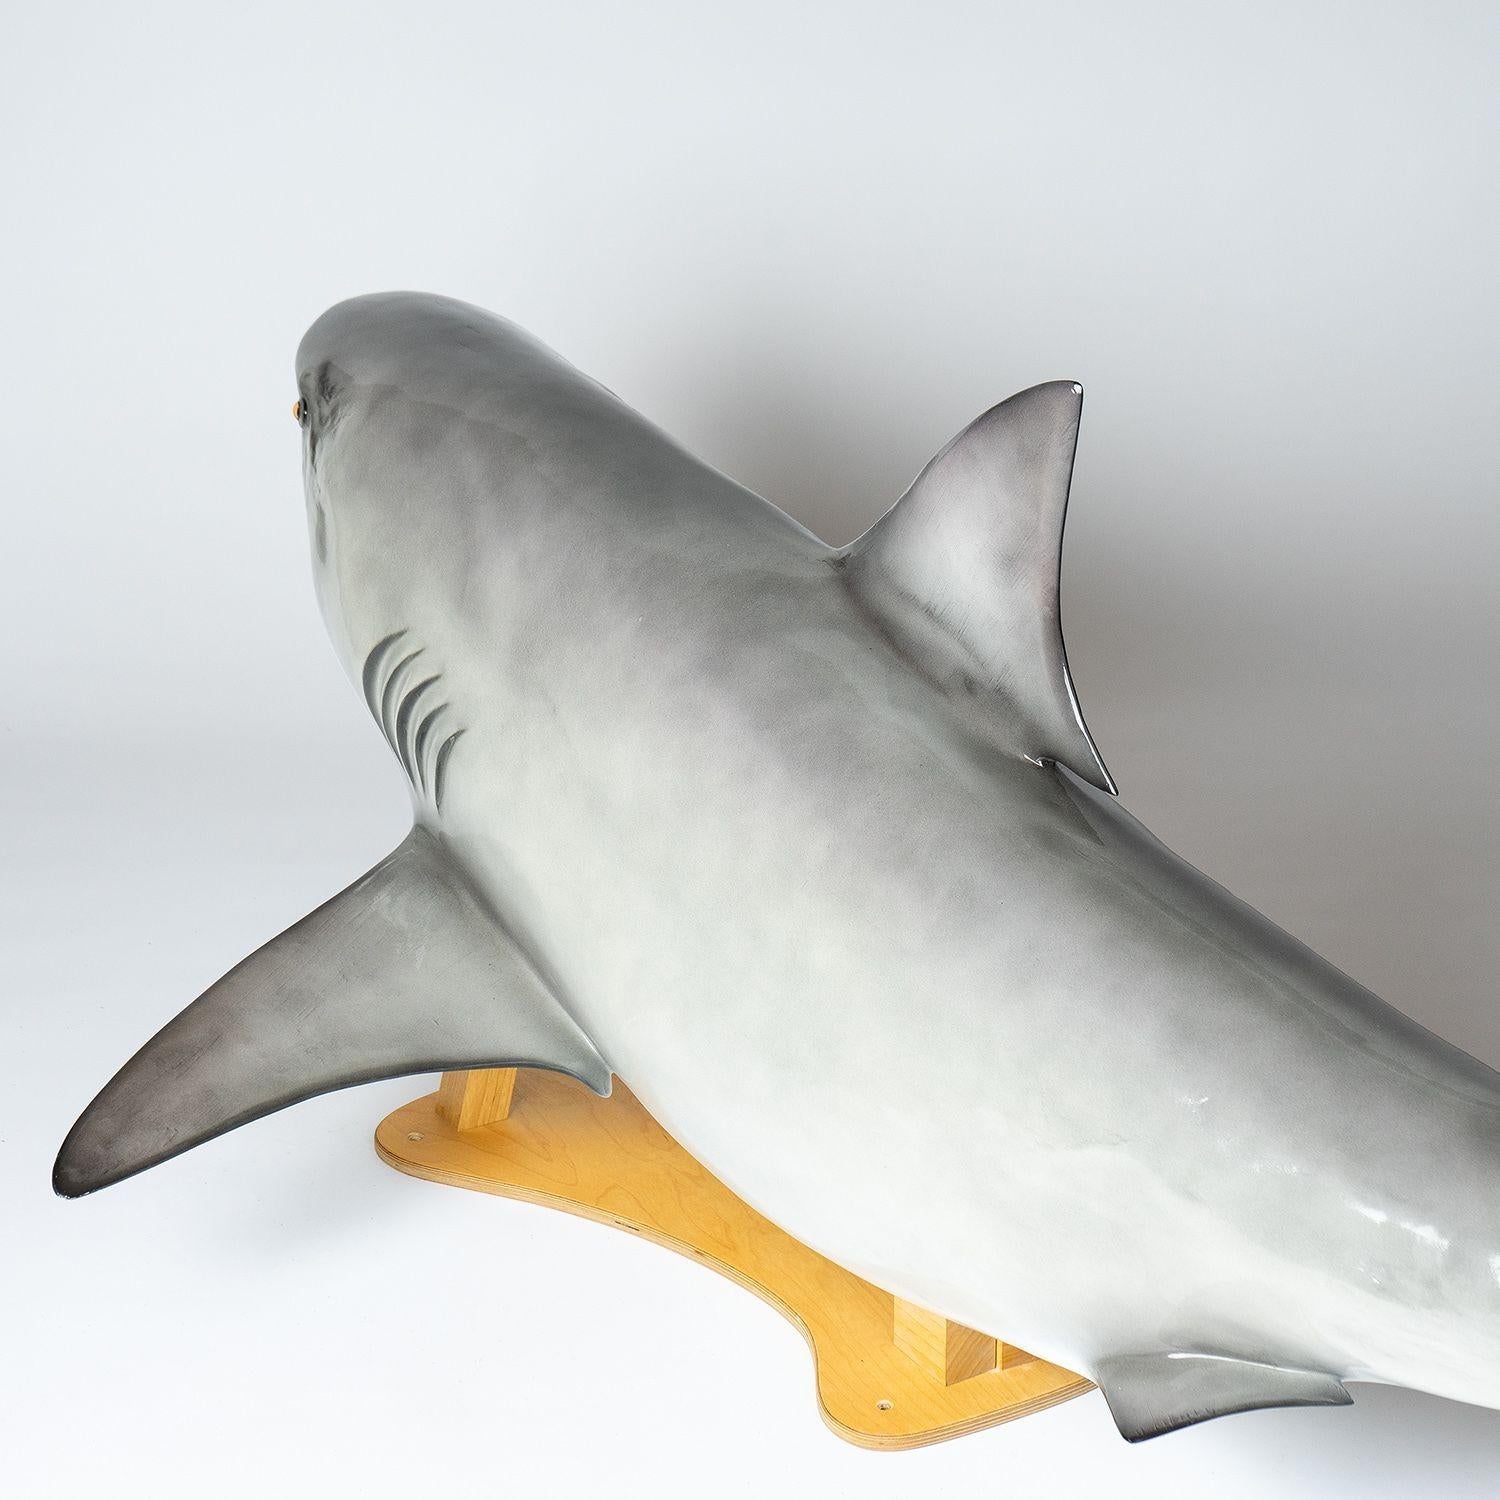 Vintage Museum-Quality Life-Size Model of a Bull Shark 6